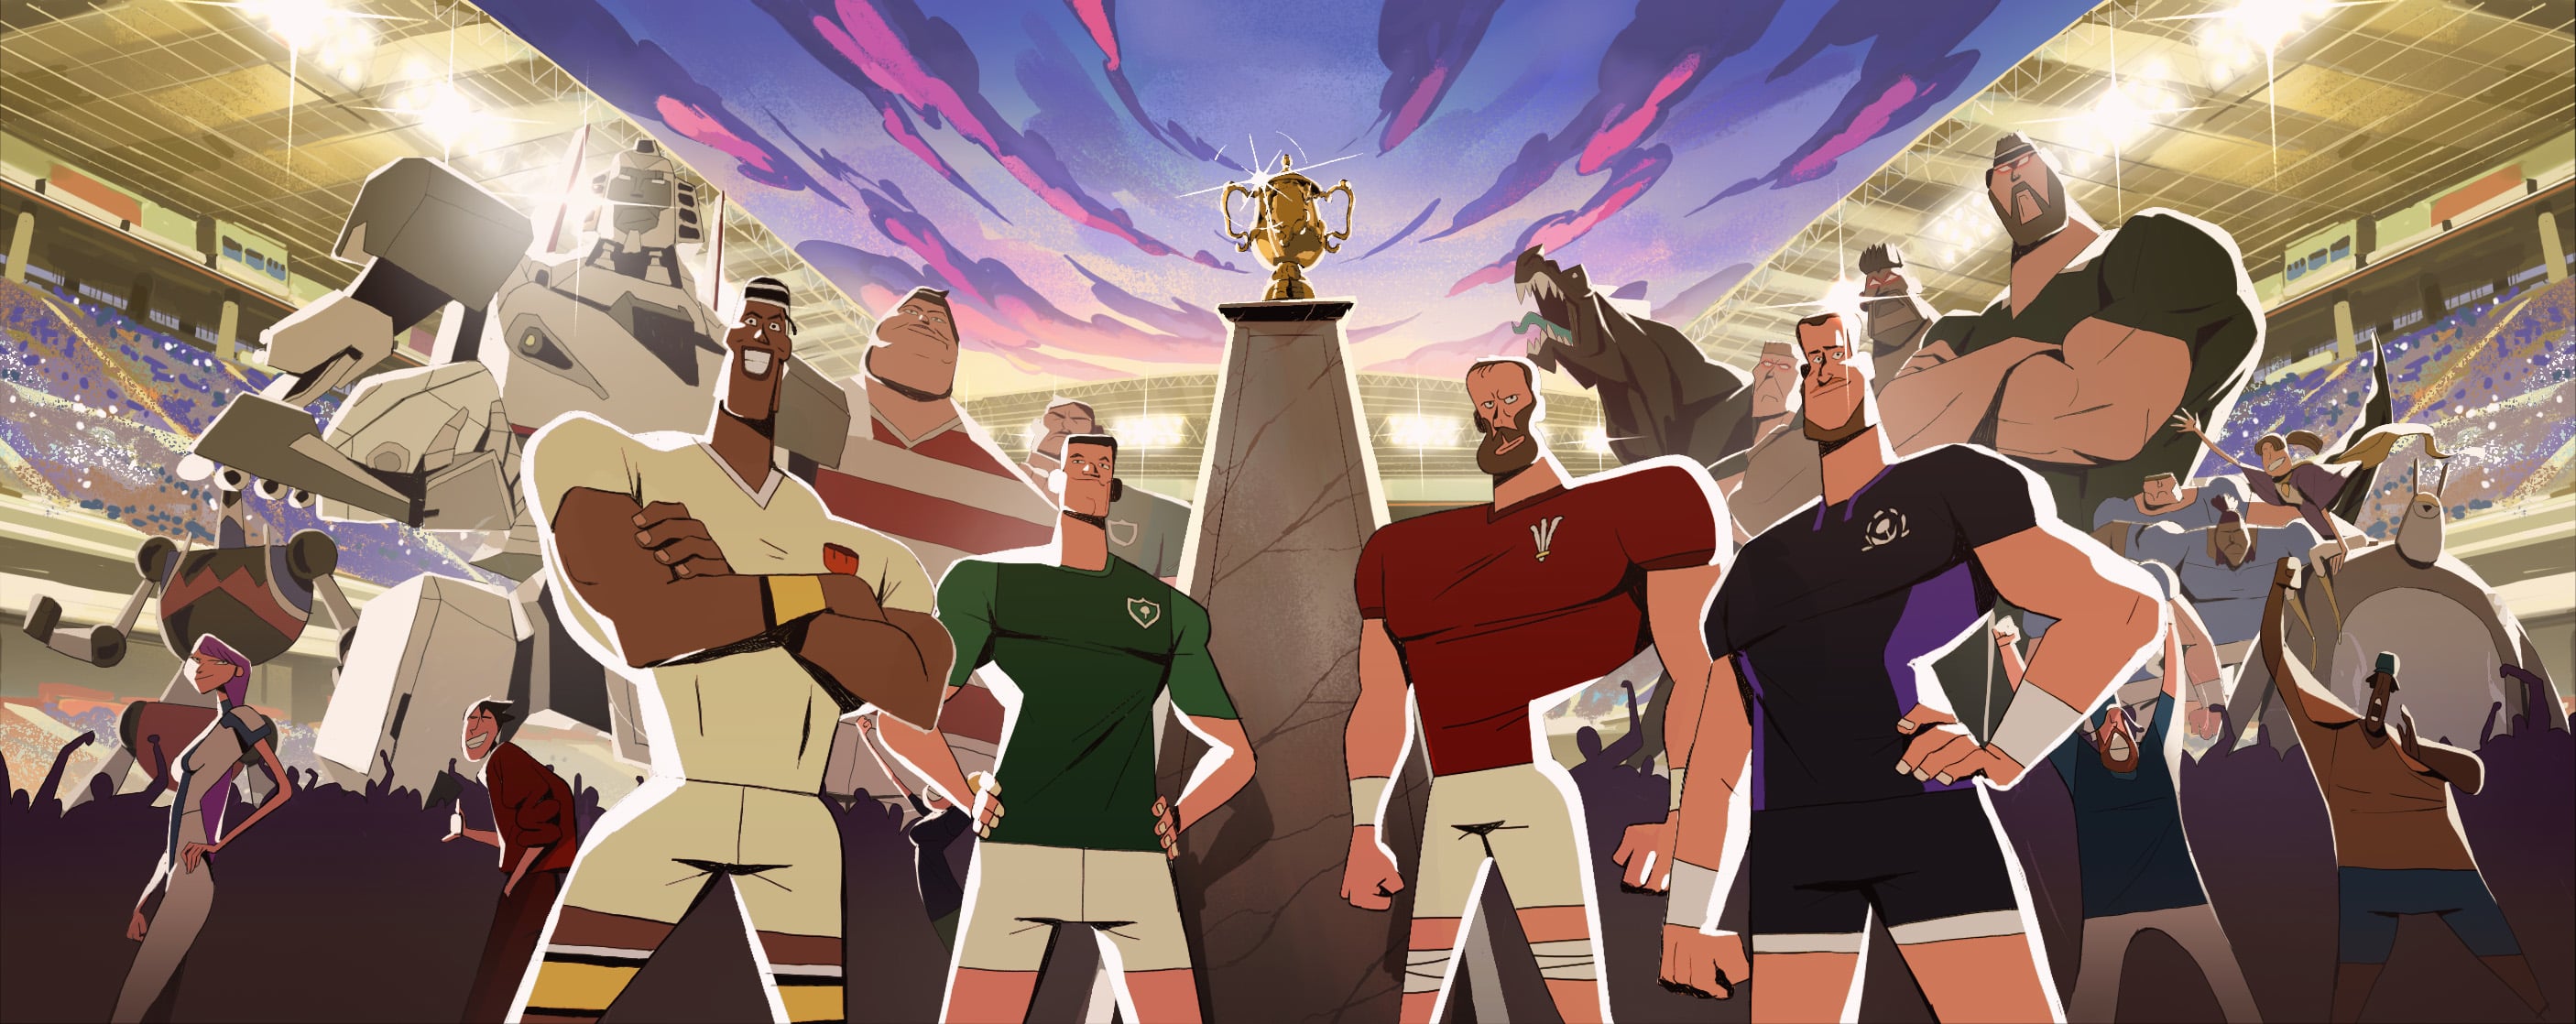 ITV Rugby World Cup 2019 on Vimeo